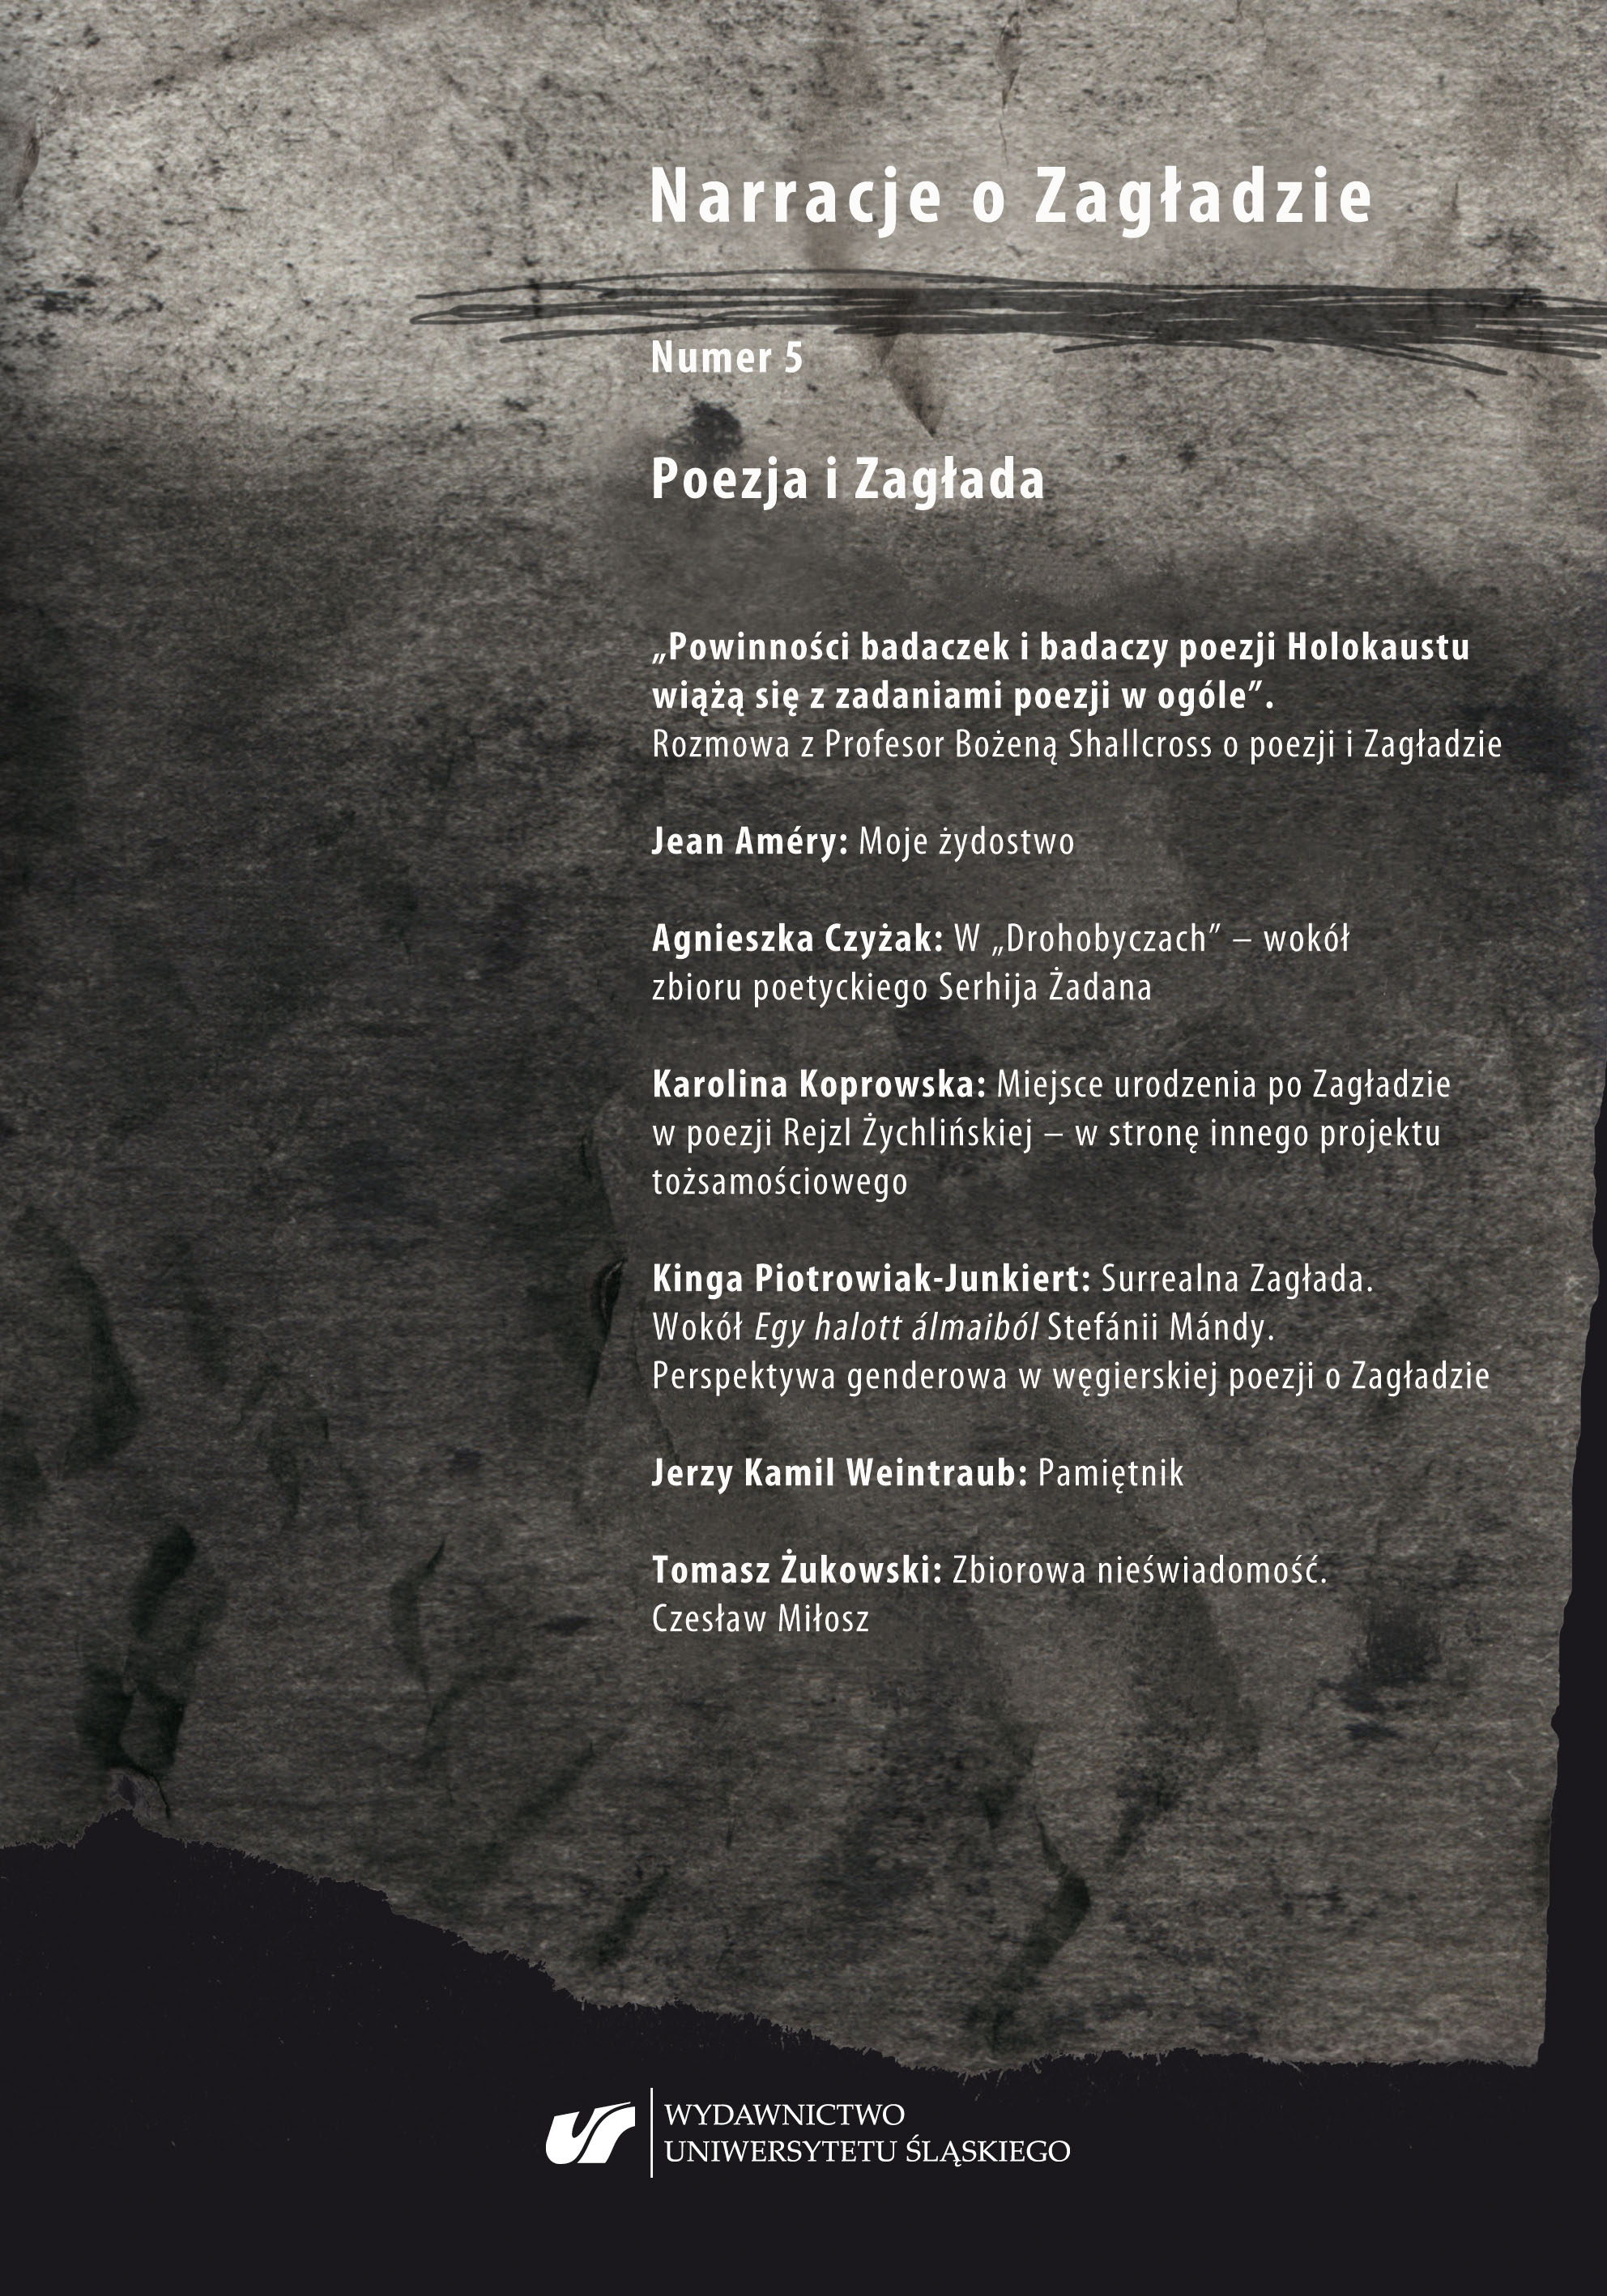 Birthplace after the Shoah in Rajzel Żychlińsky’s Poetry – Towards a Different Project of Identity Cover Image